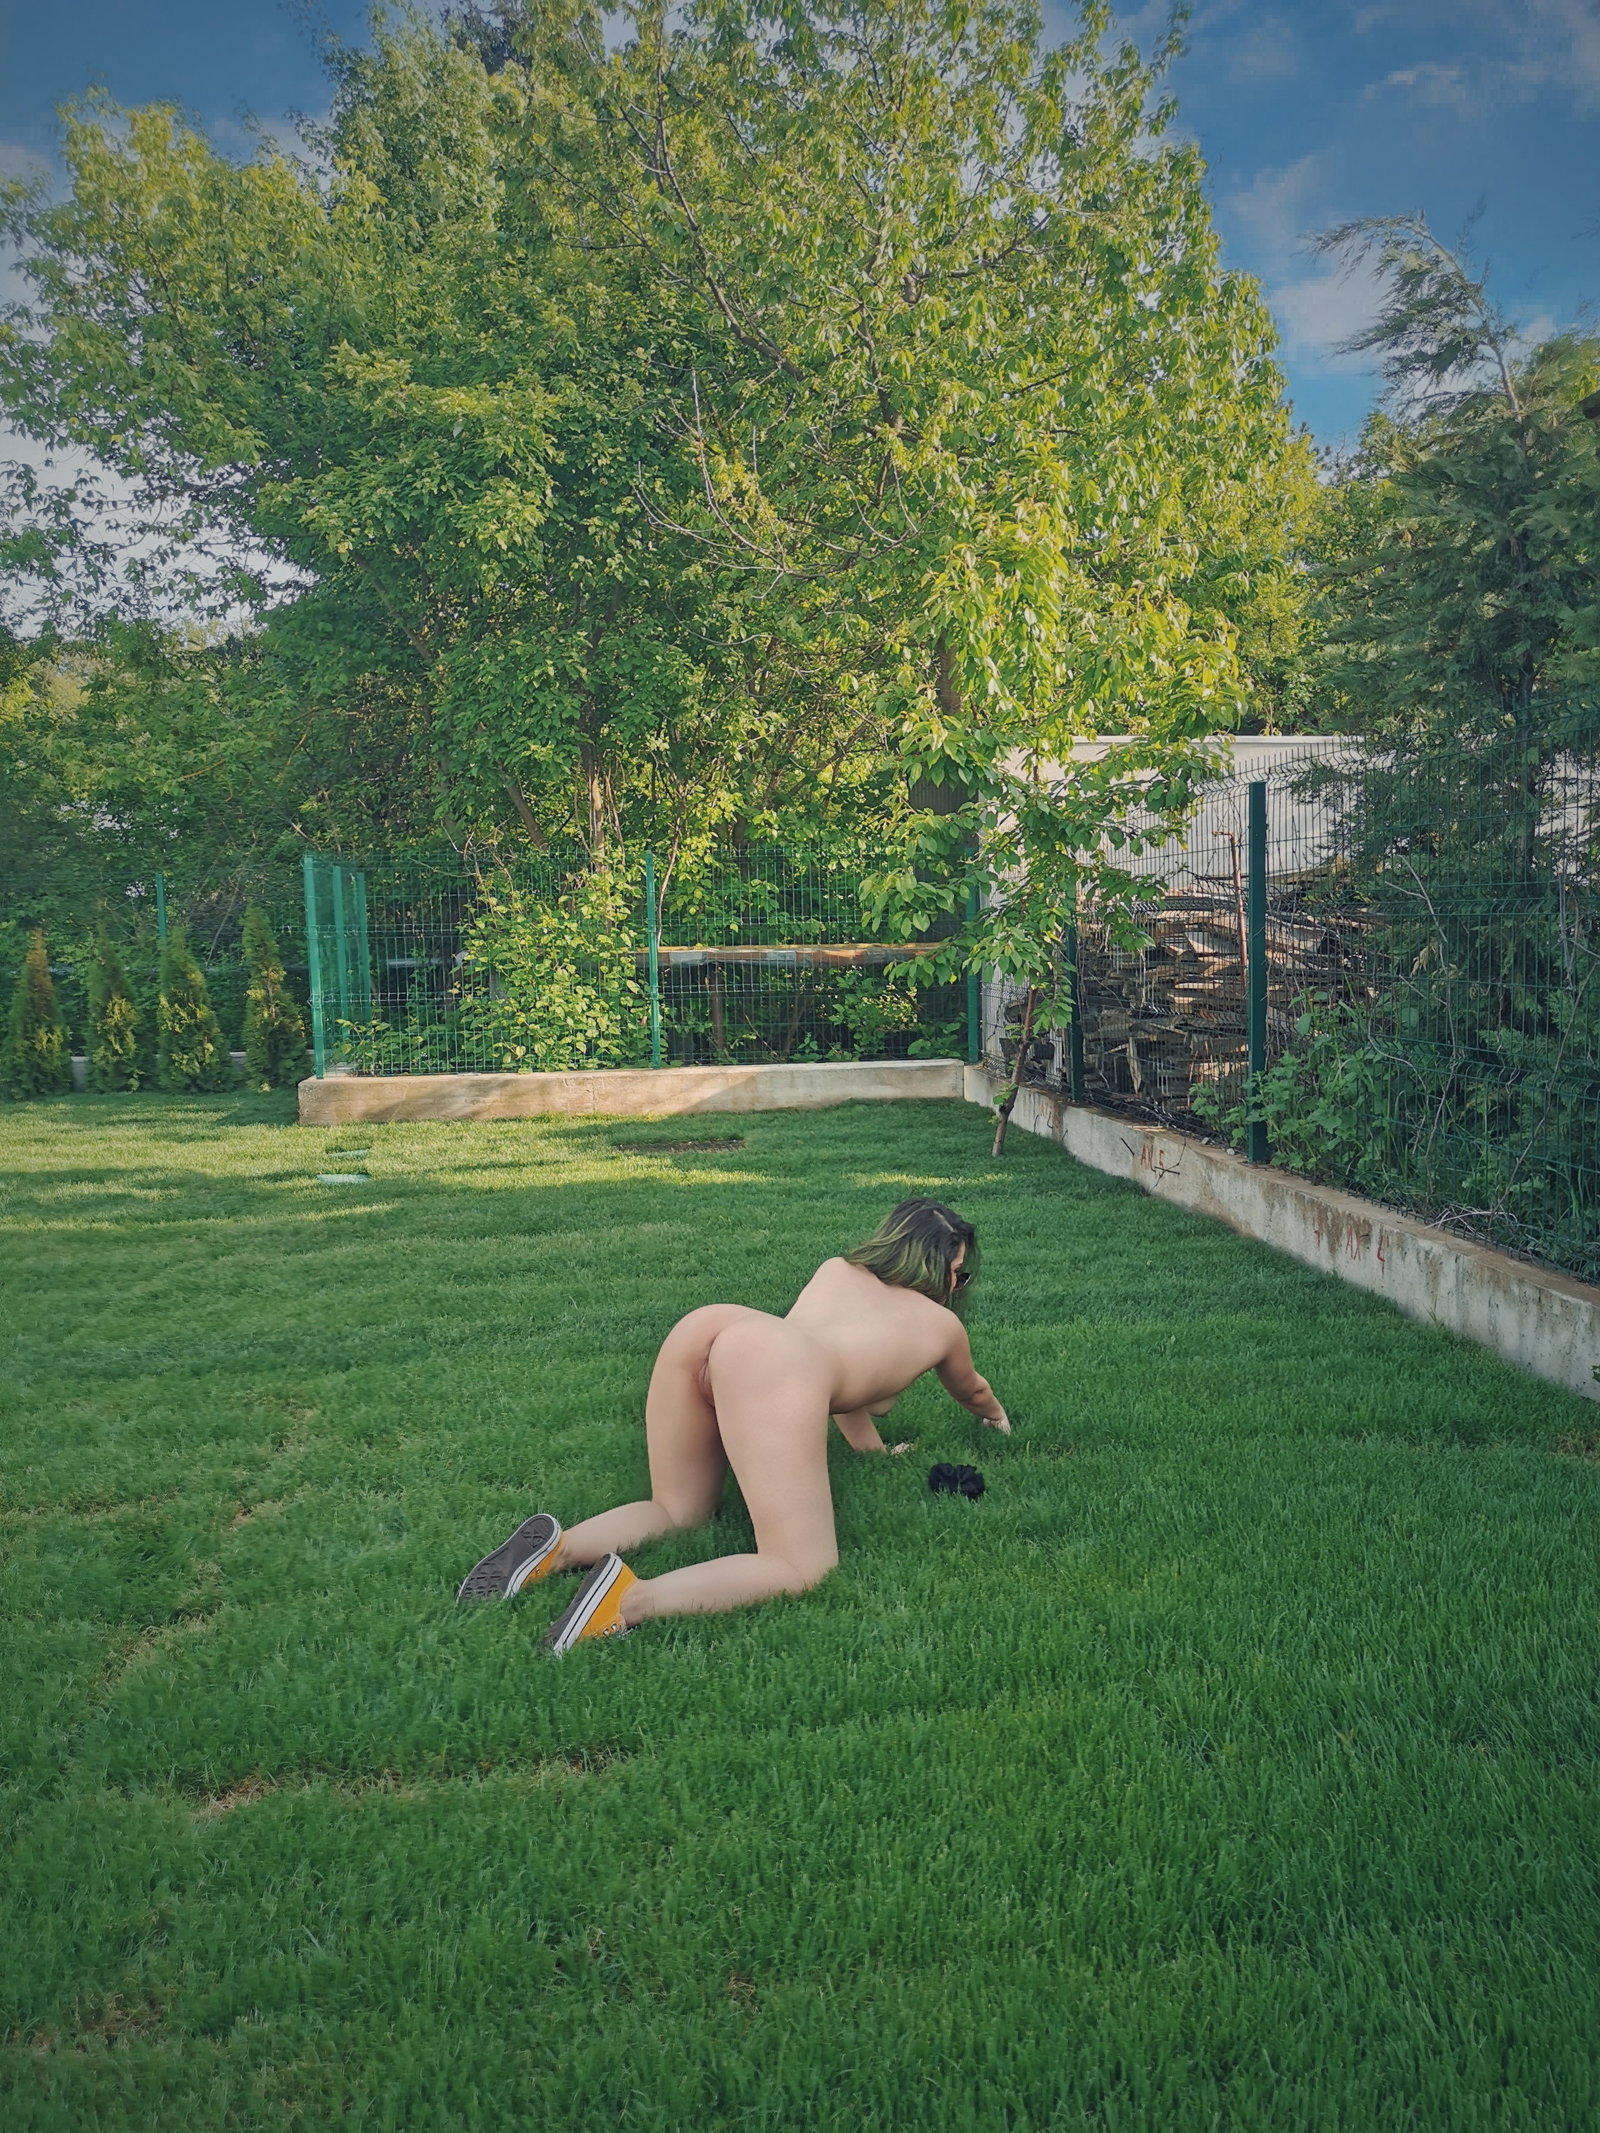 Photo by TamTam with the username @TamTam, who is a star user,  May 5, 2020 at 6:22 AM. The post is about the topic Best Nude and the text says 'lookinf for the plug in the greens 
#sharesomelove
#ass
#nude
#milf
#sunnydays
#glow'